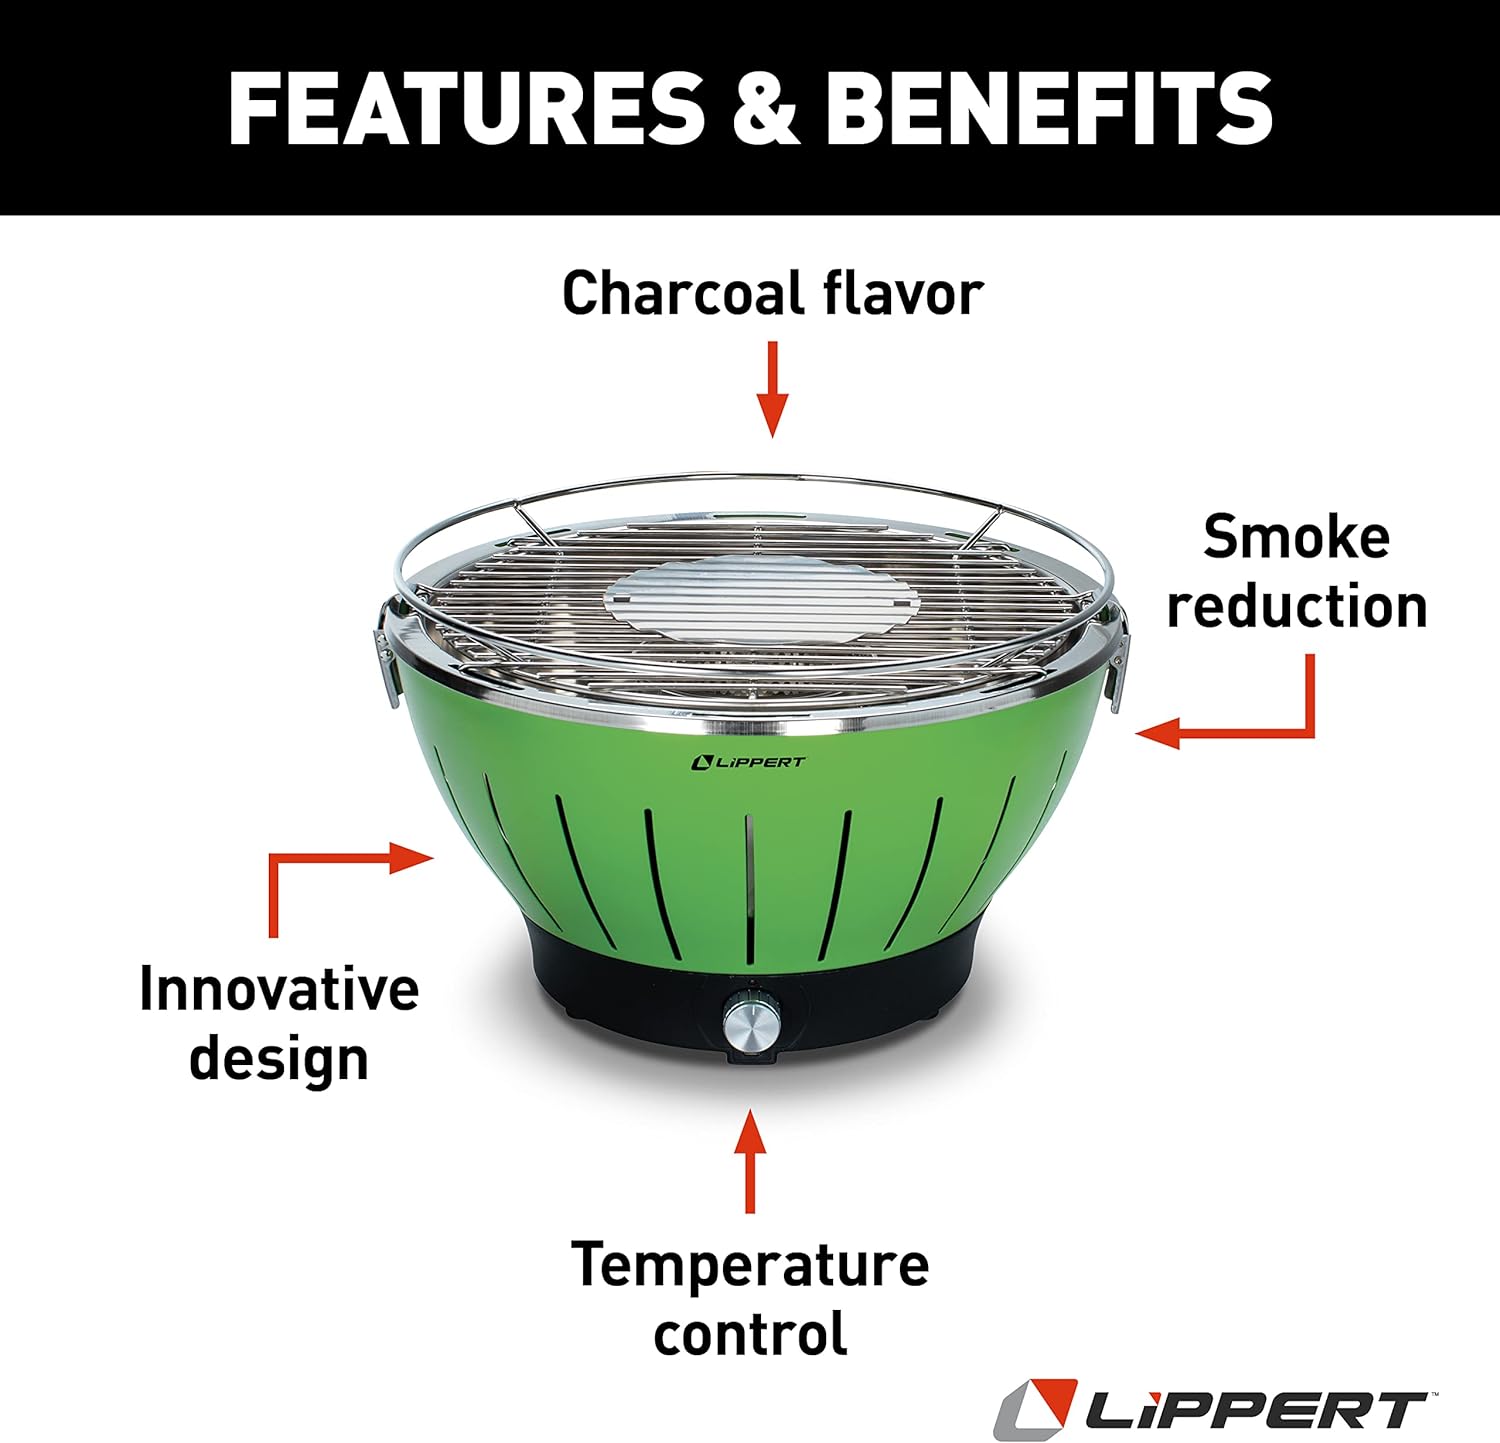 Lippert Odyssey Portable Charcoal Grill, Green